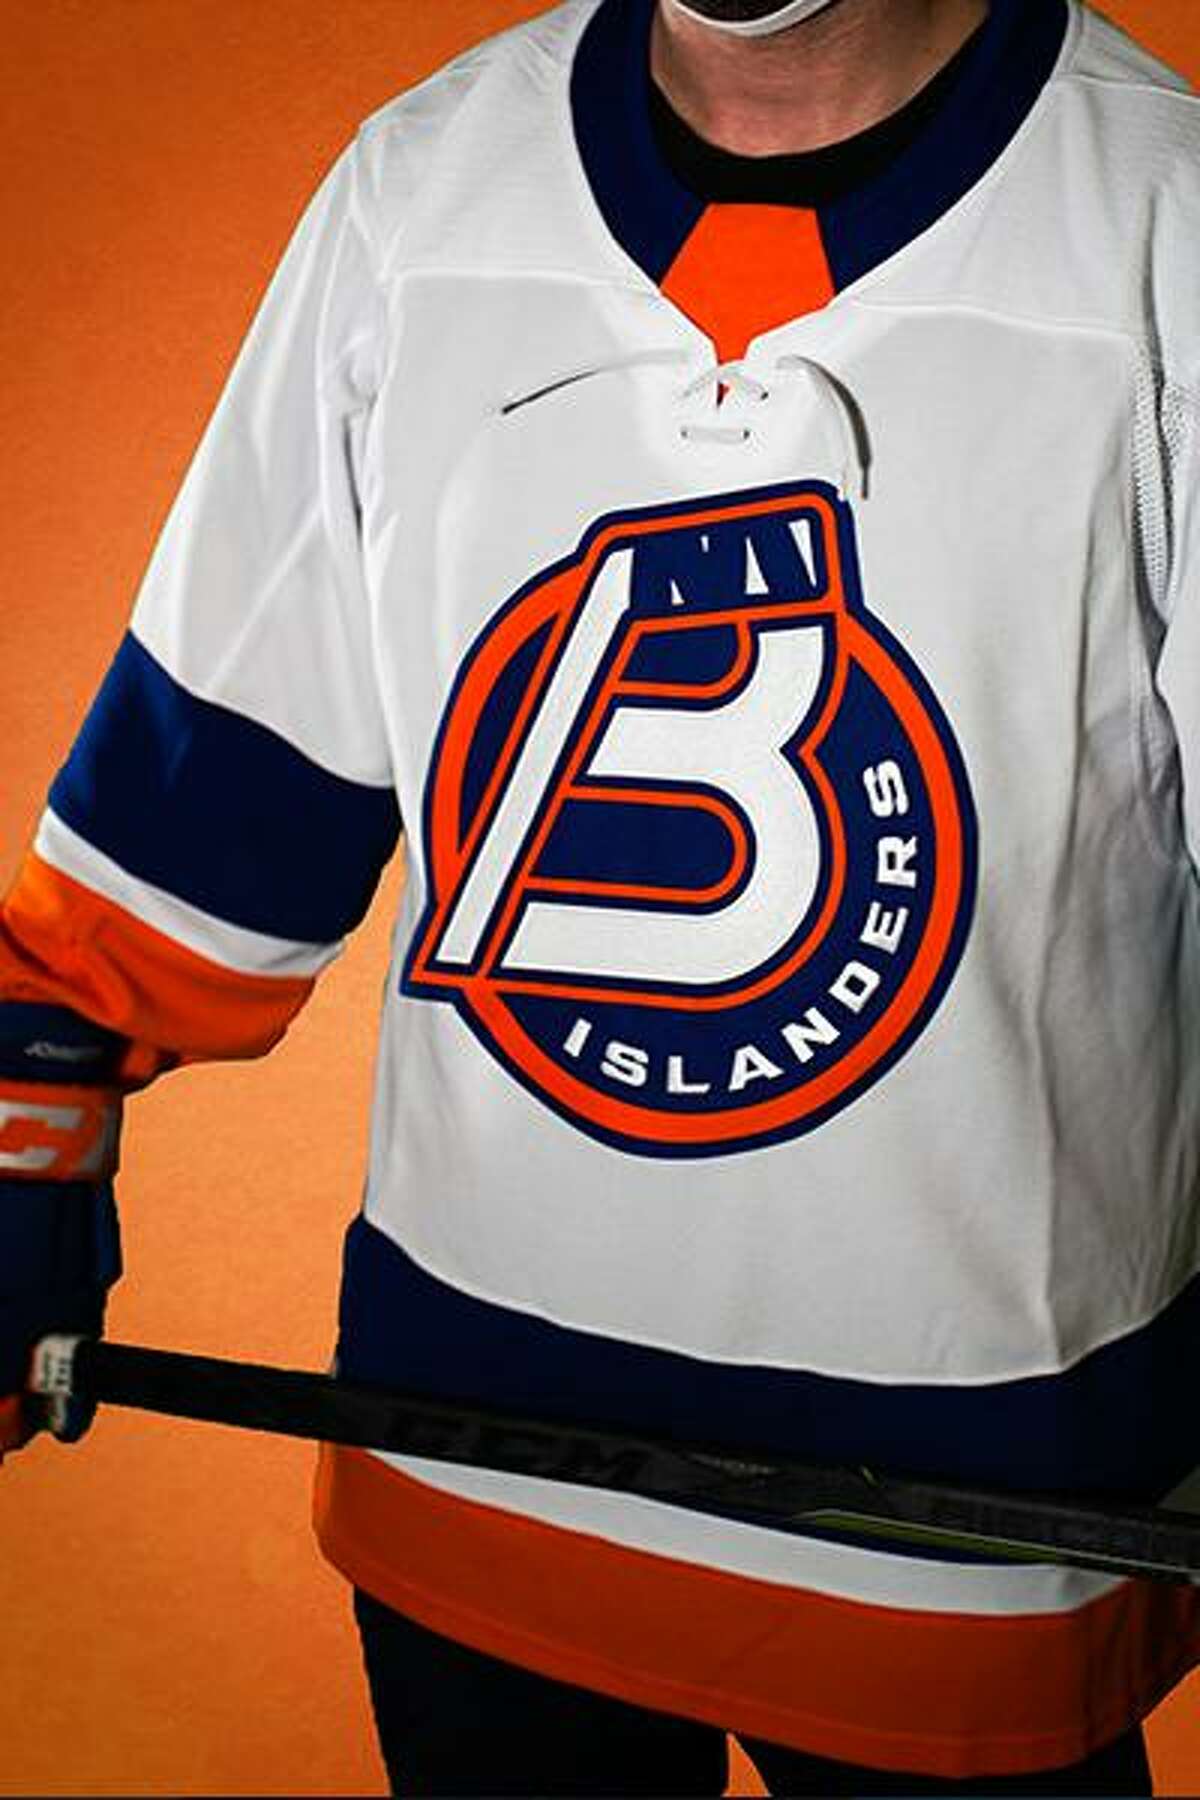 Bridgeport’s AHL franchise is rebranding from the Sound Tigers to the Bridgeport Islanders the team announced on Monday.